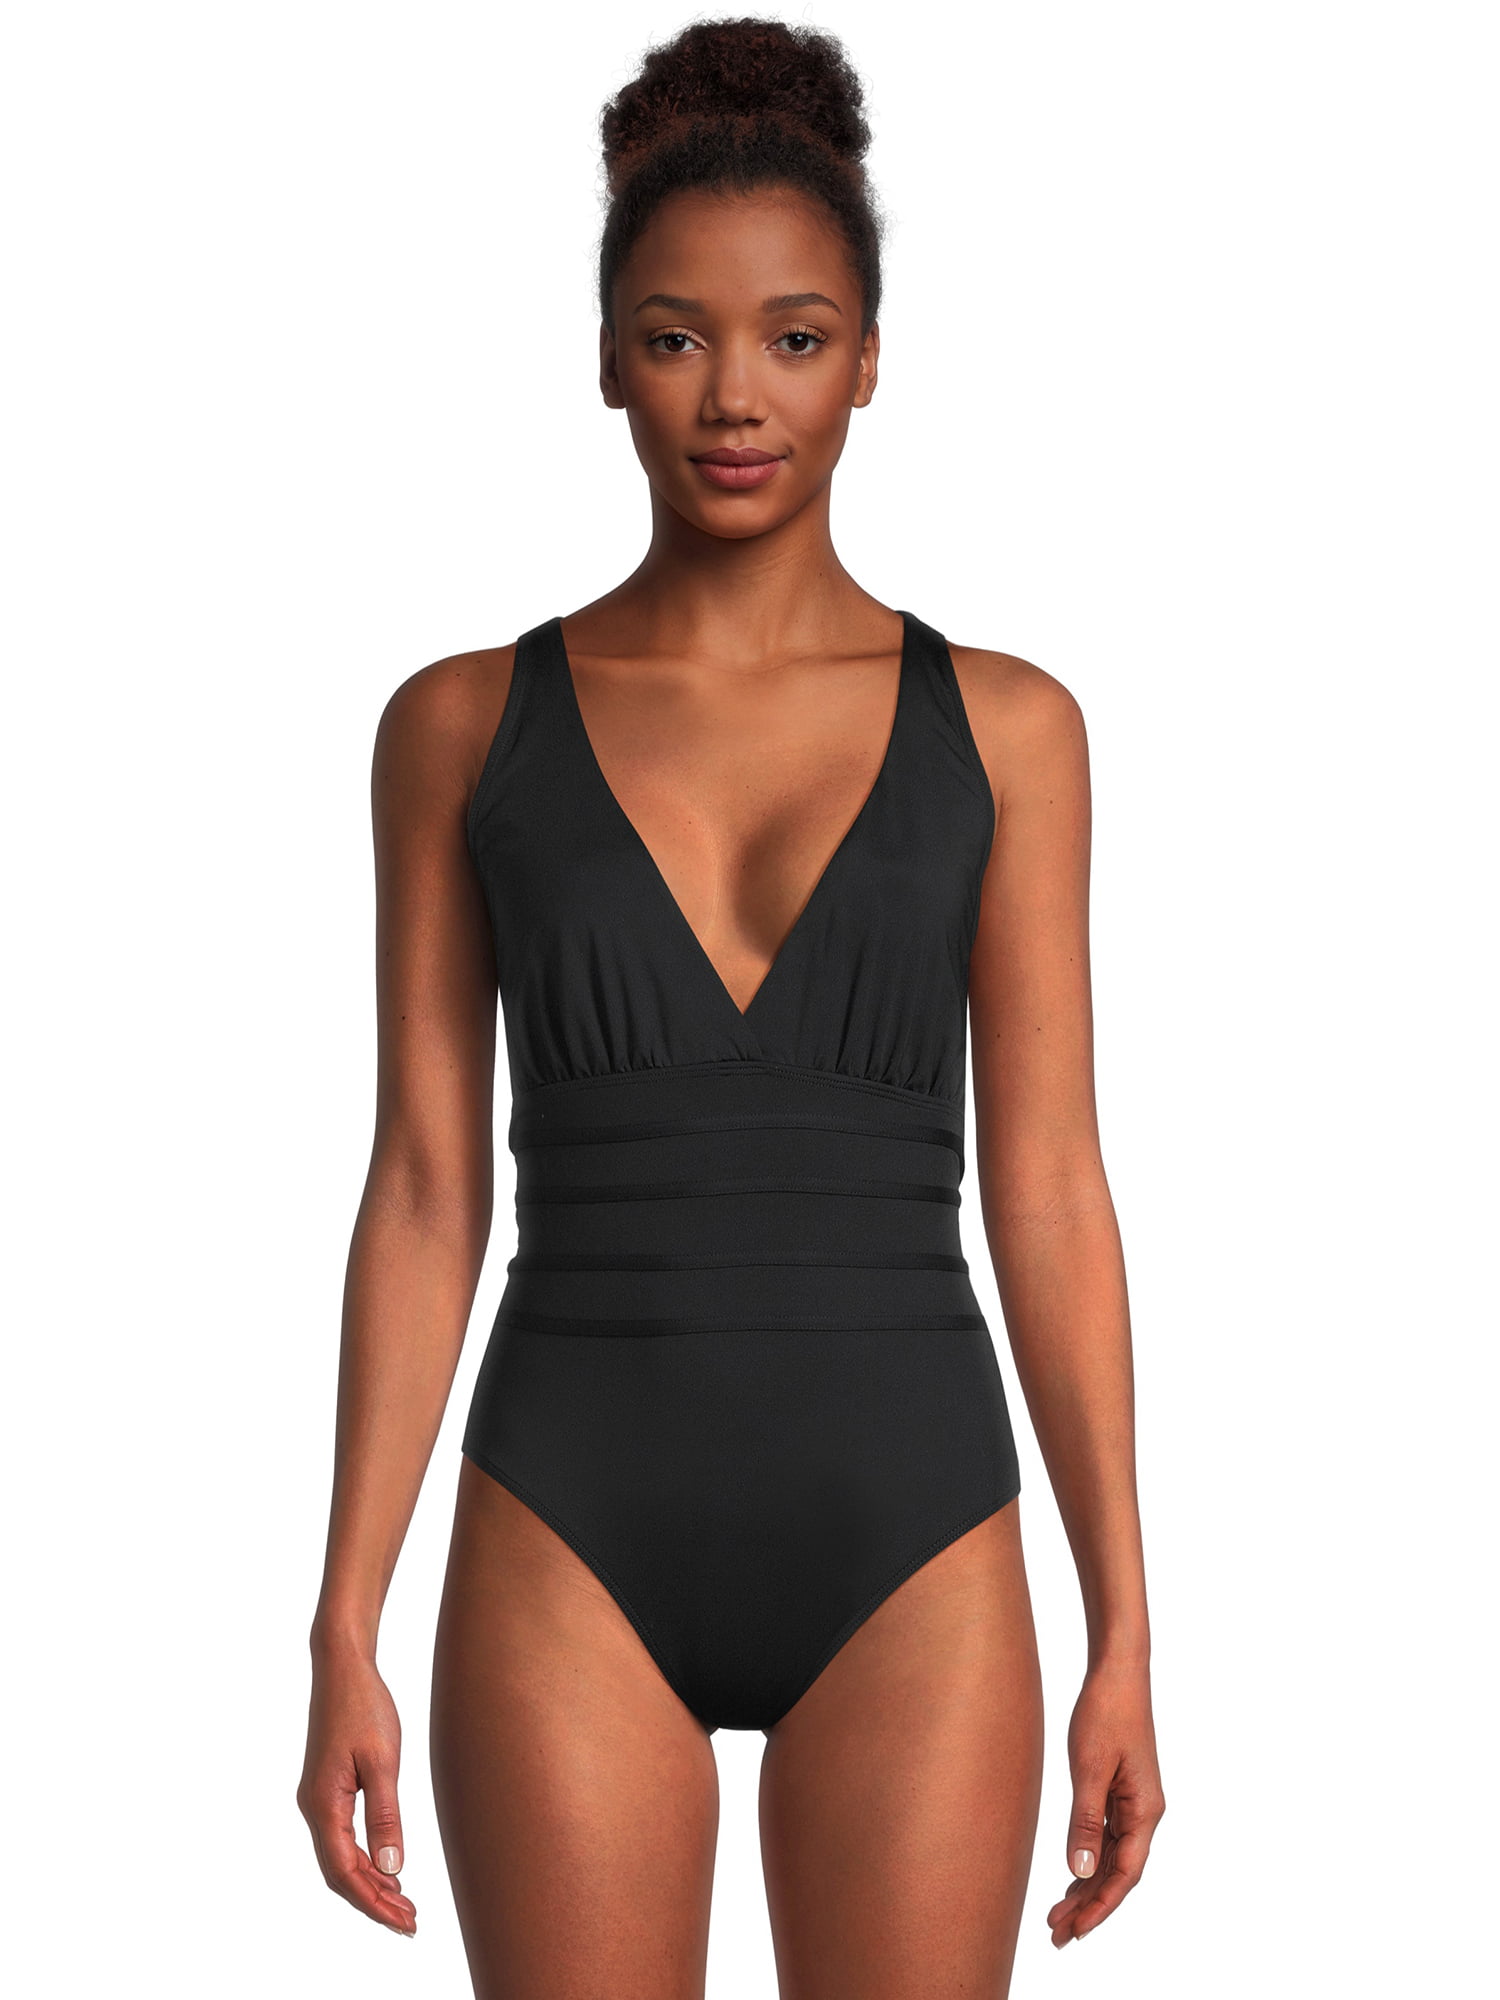 Catherine Malandrino Women's One Piece Plunge Swimsuit with Strappy Back 